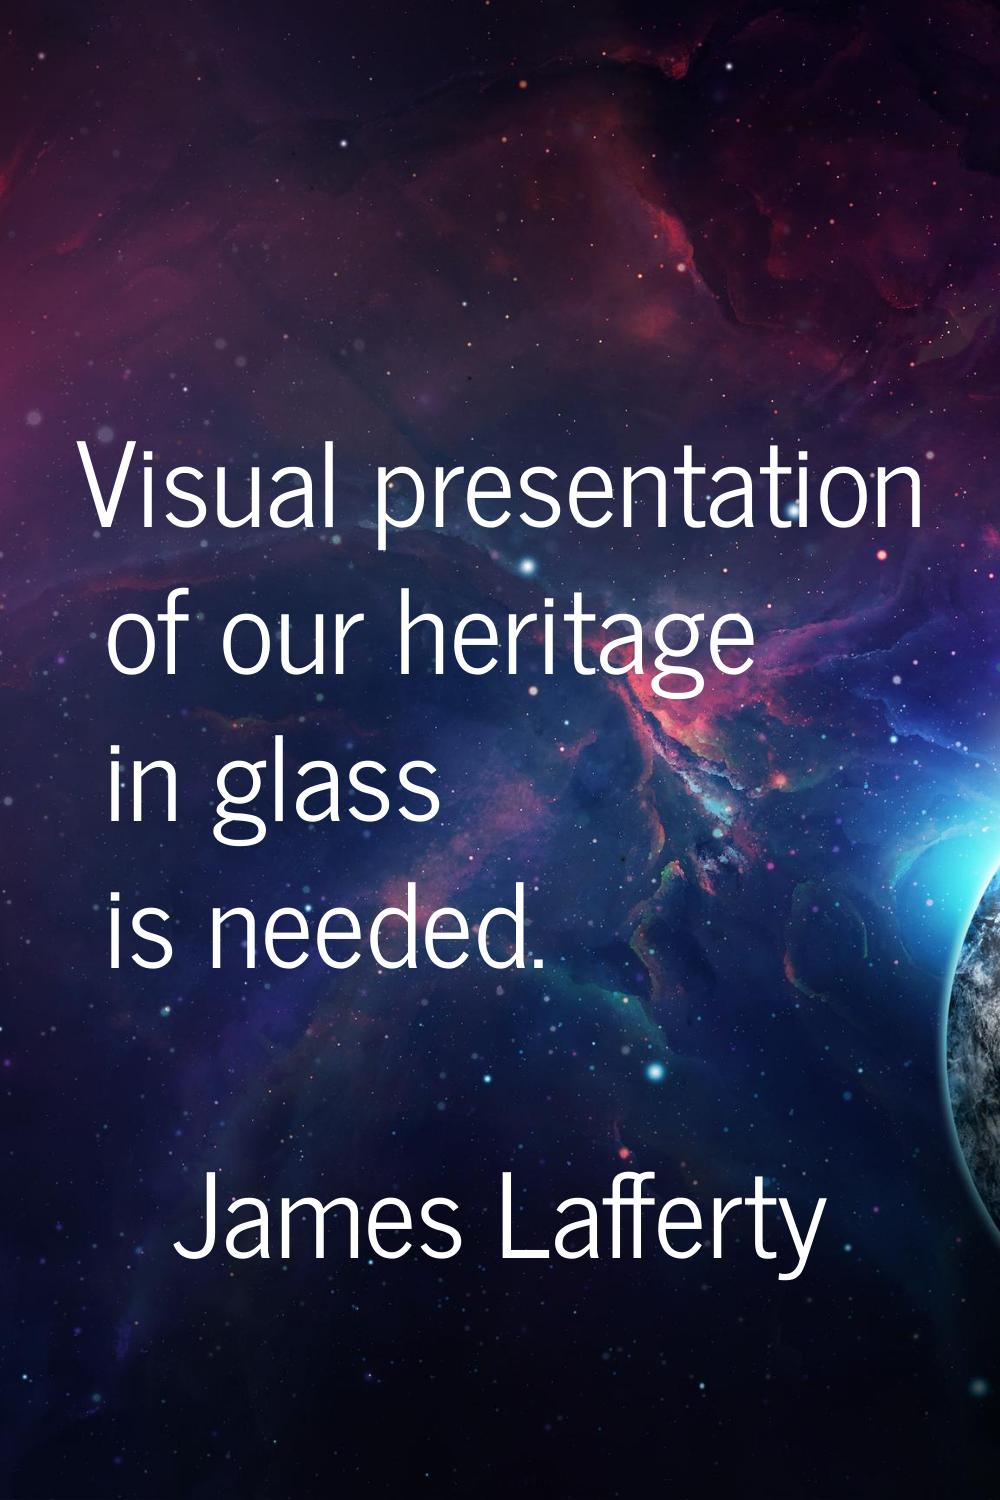 Visual presentation of our heritage in glass is needed.